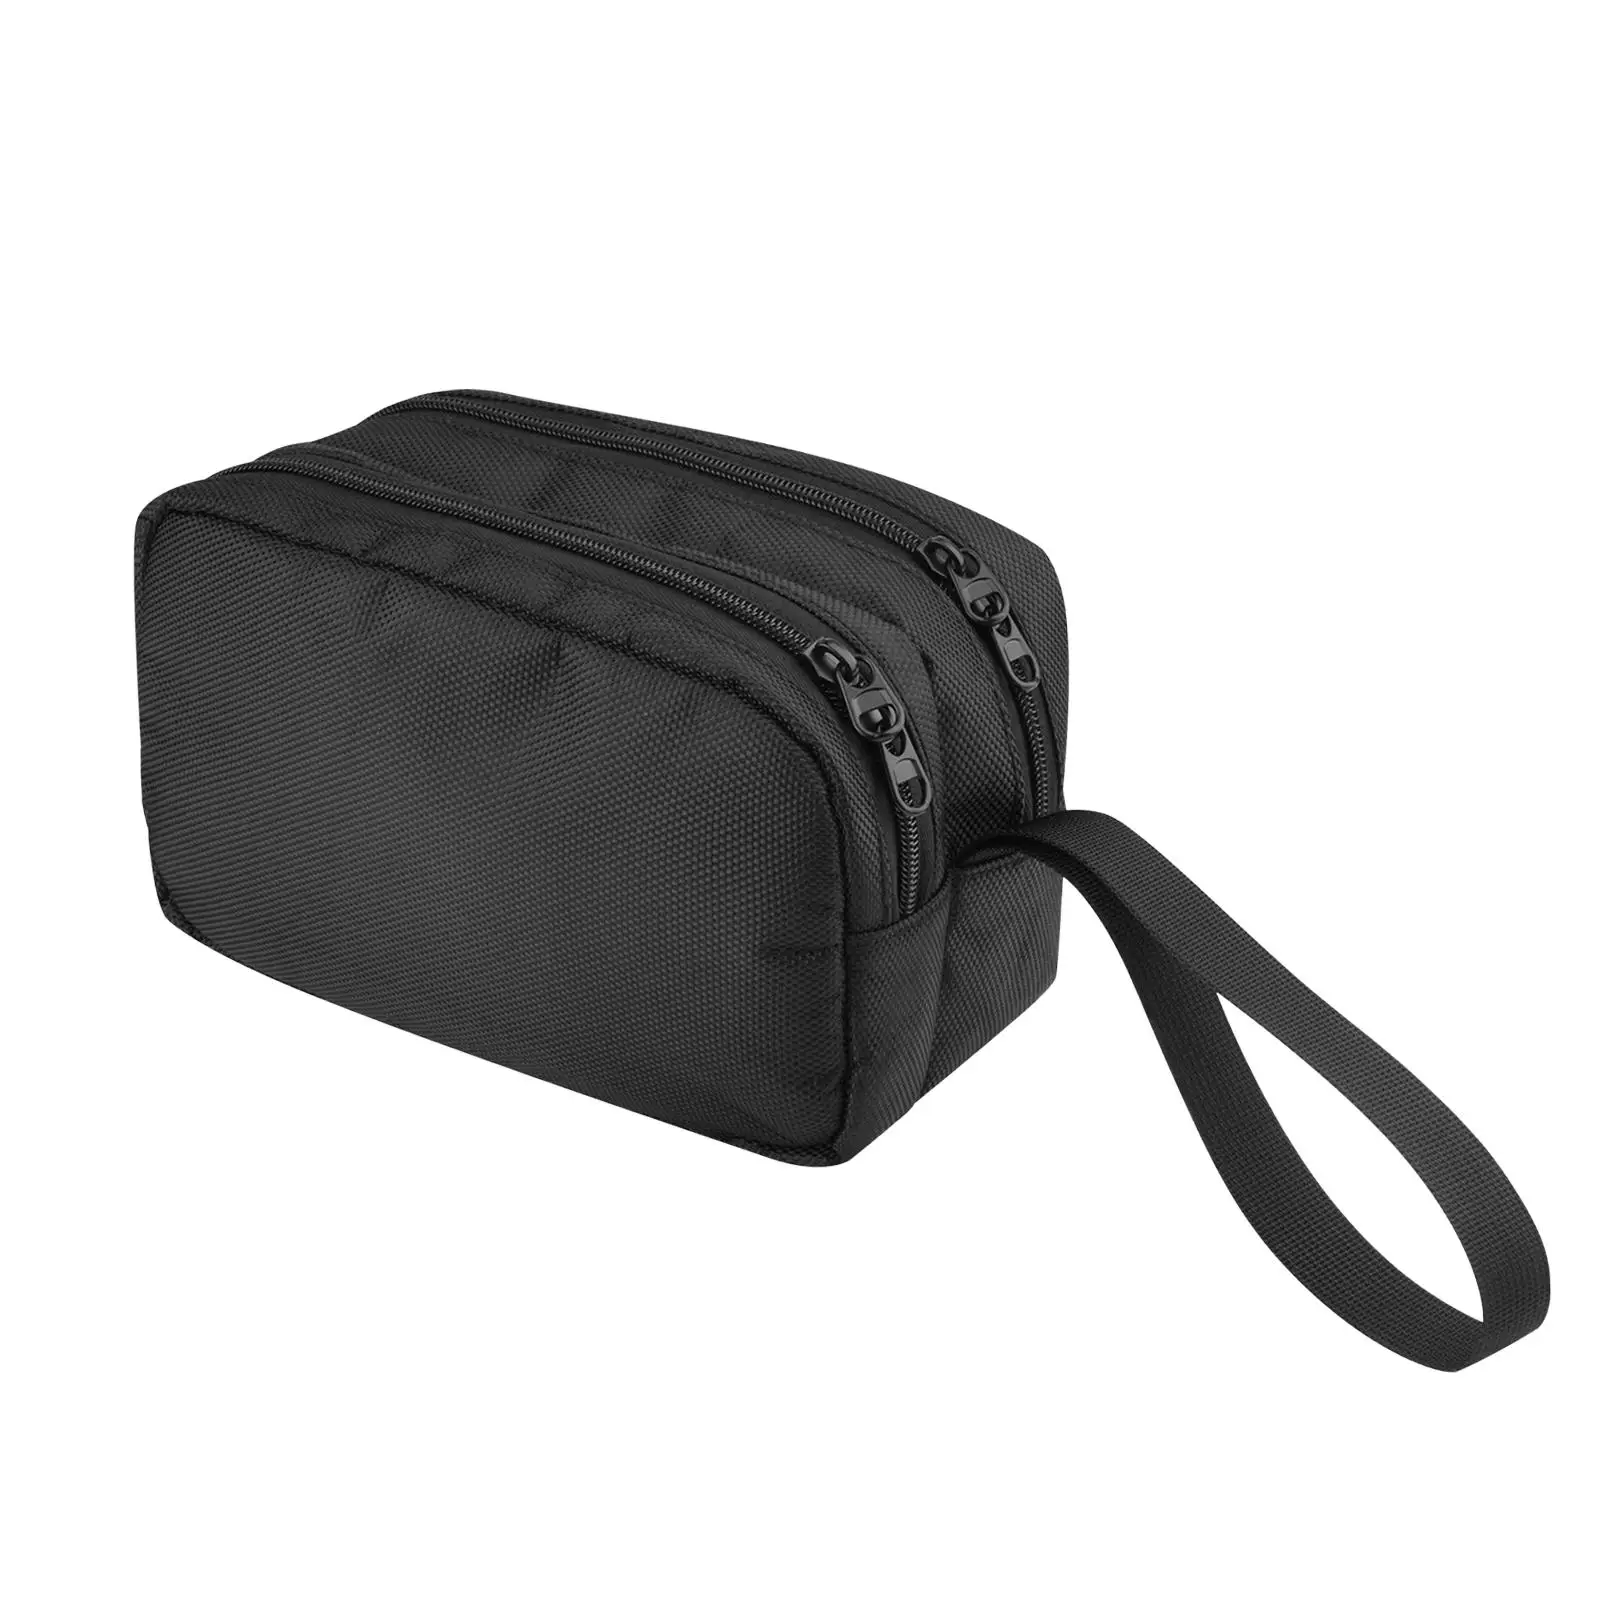 Protable Protect Case Waterproof Two Dual Zippers Design Outdoor Storage Bag Black Carrying Case for USB Cable Accessories Wires